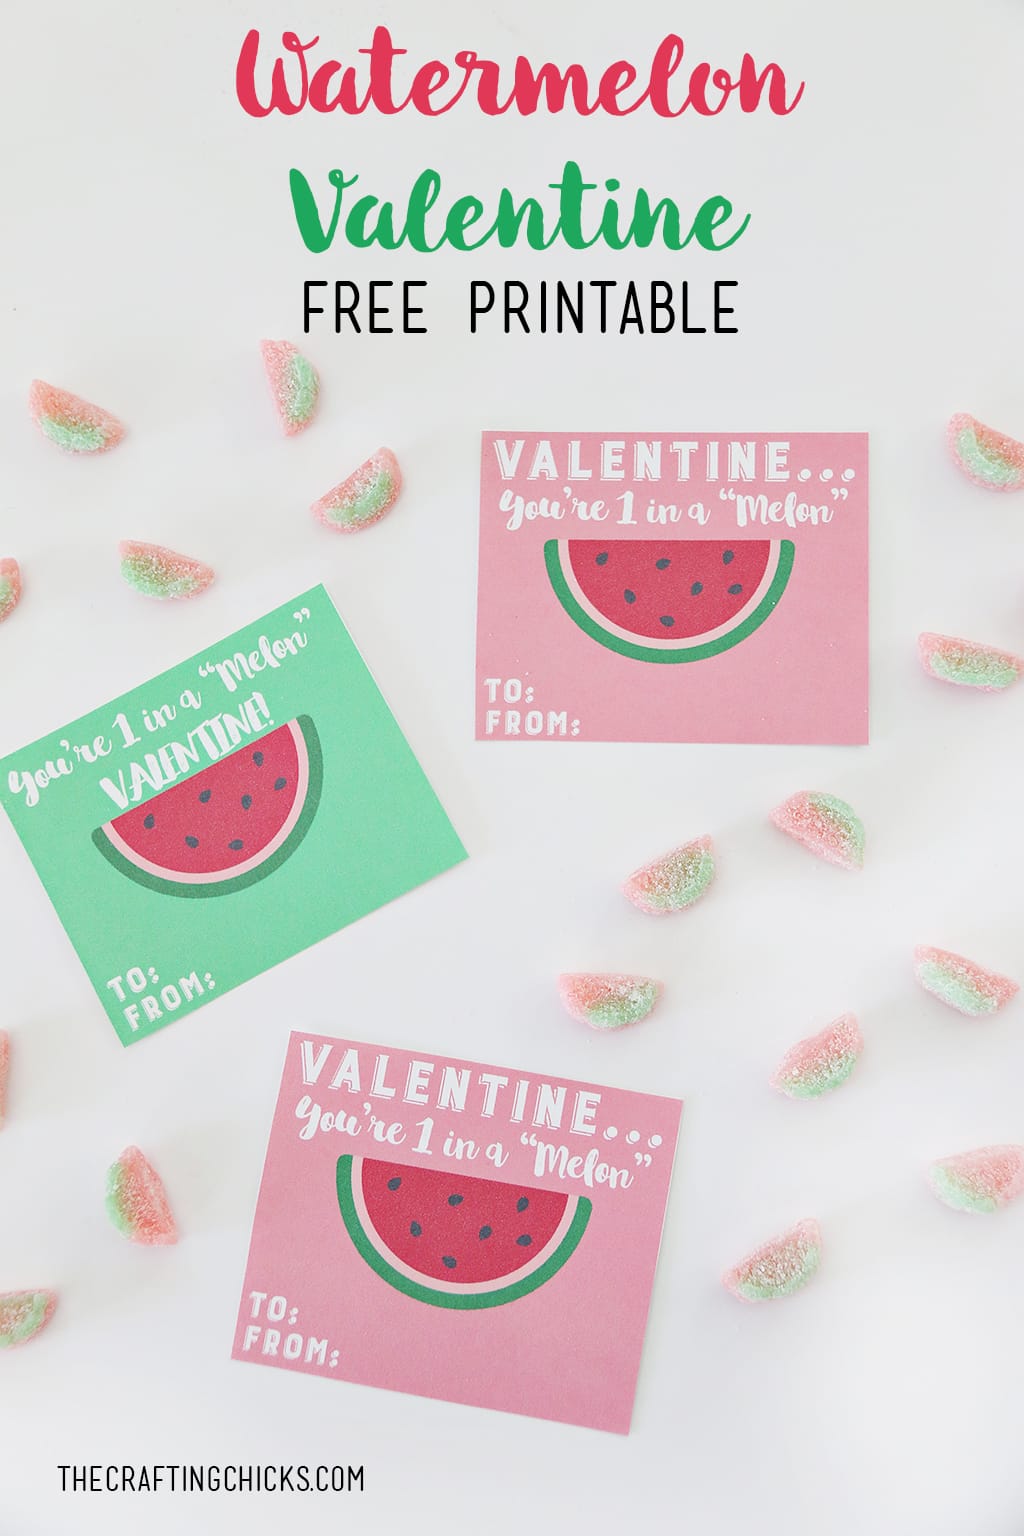 You're One in a "Melon" Valentine Printable